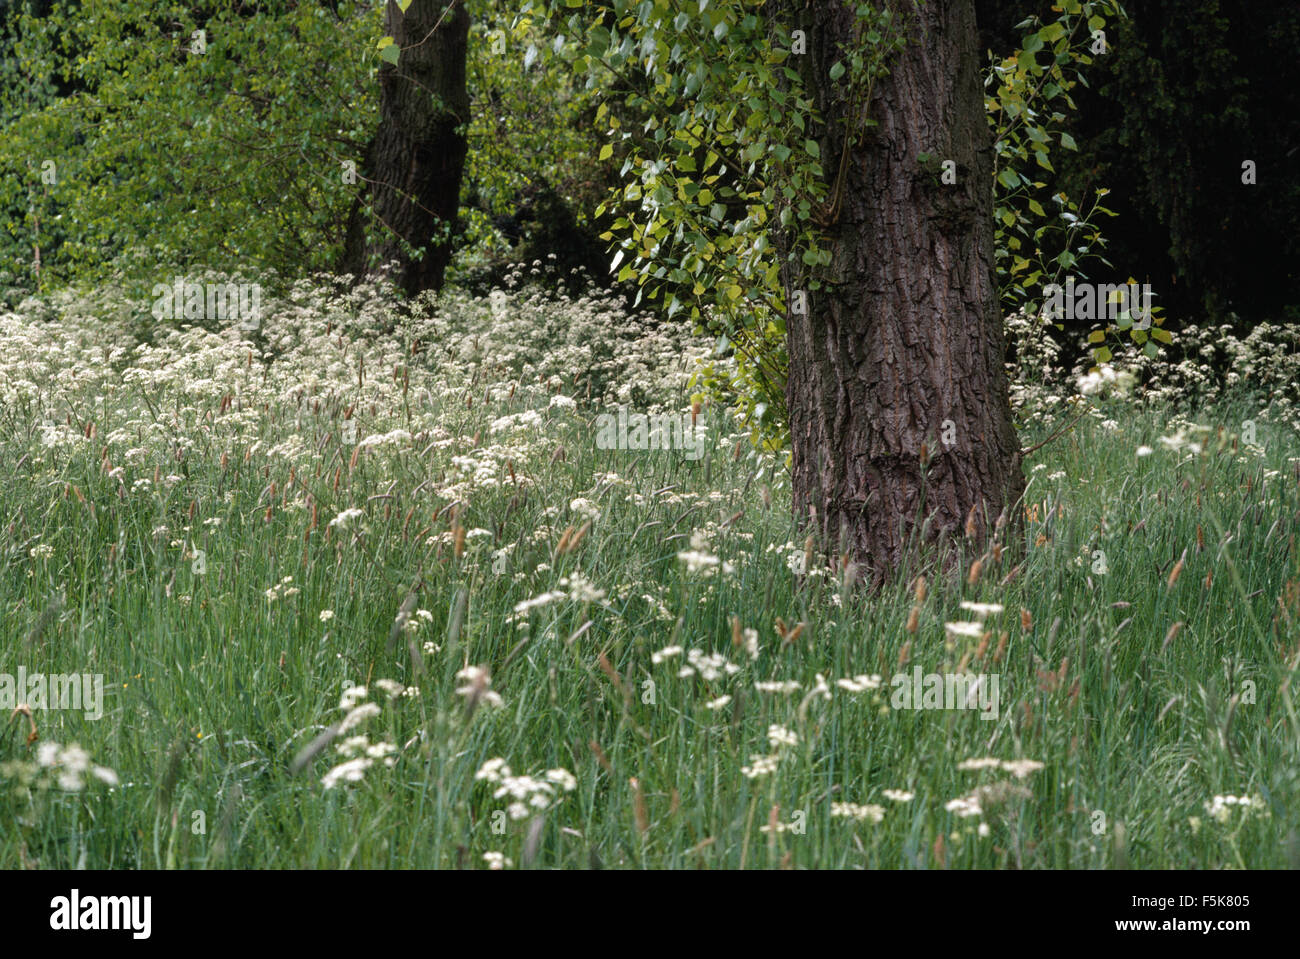 White cow parsley growing in long grass in a wild garden Stock Photo